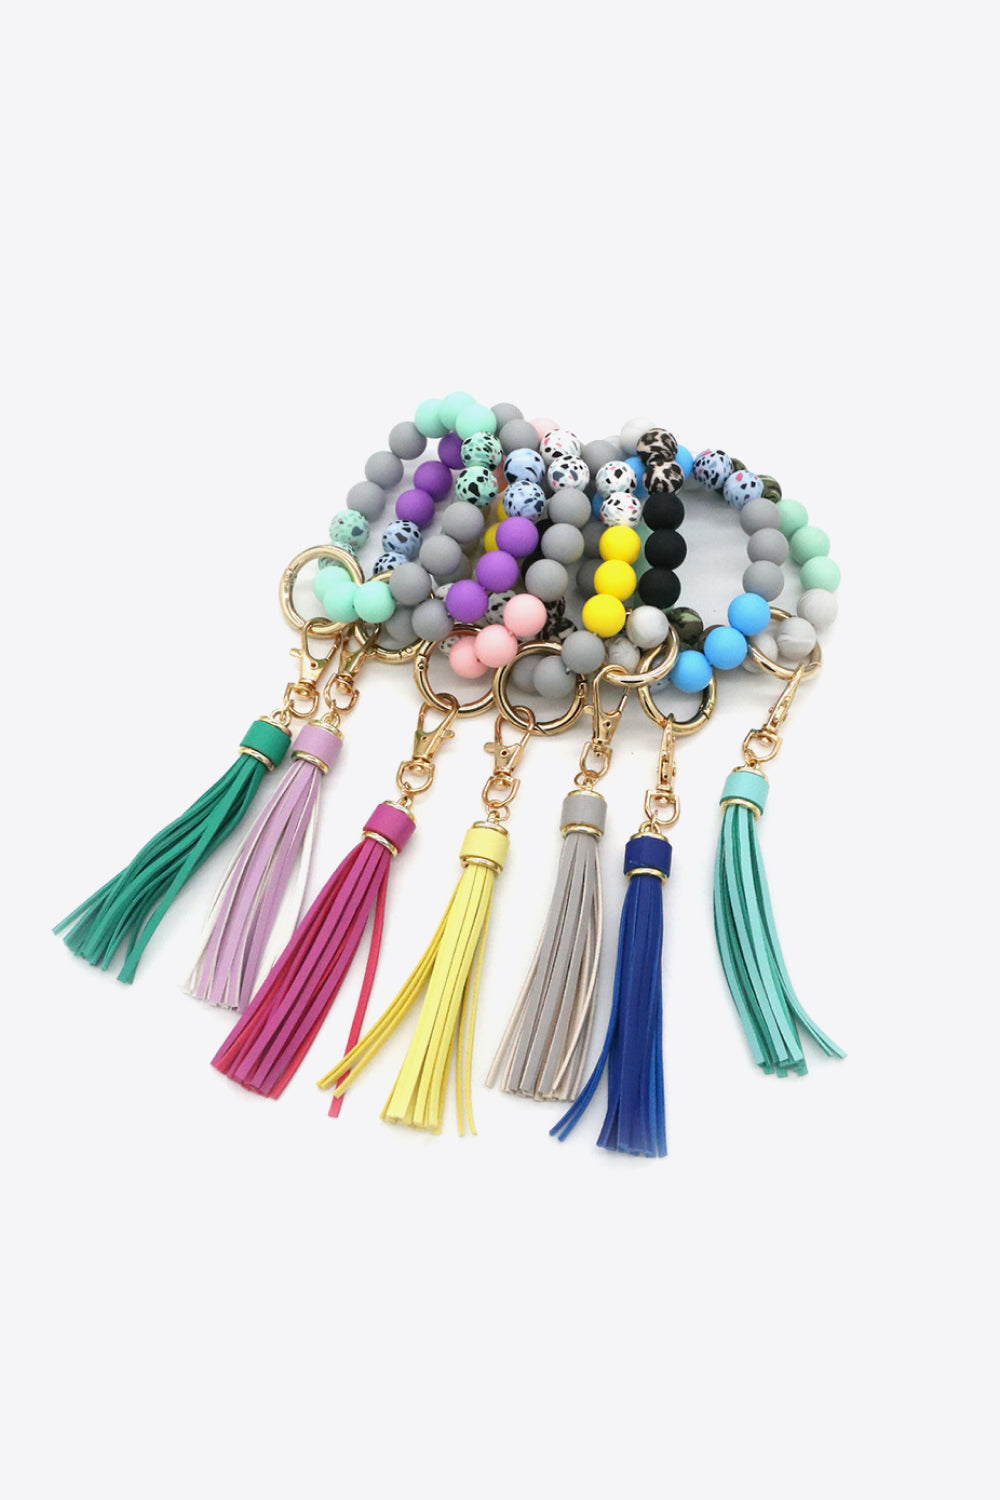 Trendsi Cupid Beauty Supplies Keychains Assorted 2-Pack Multicolored Beaded Tassel Keychain